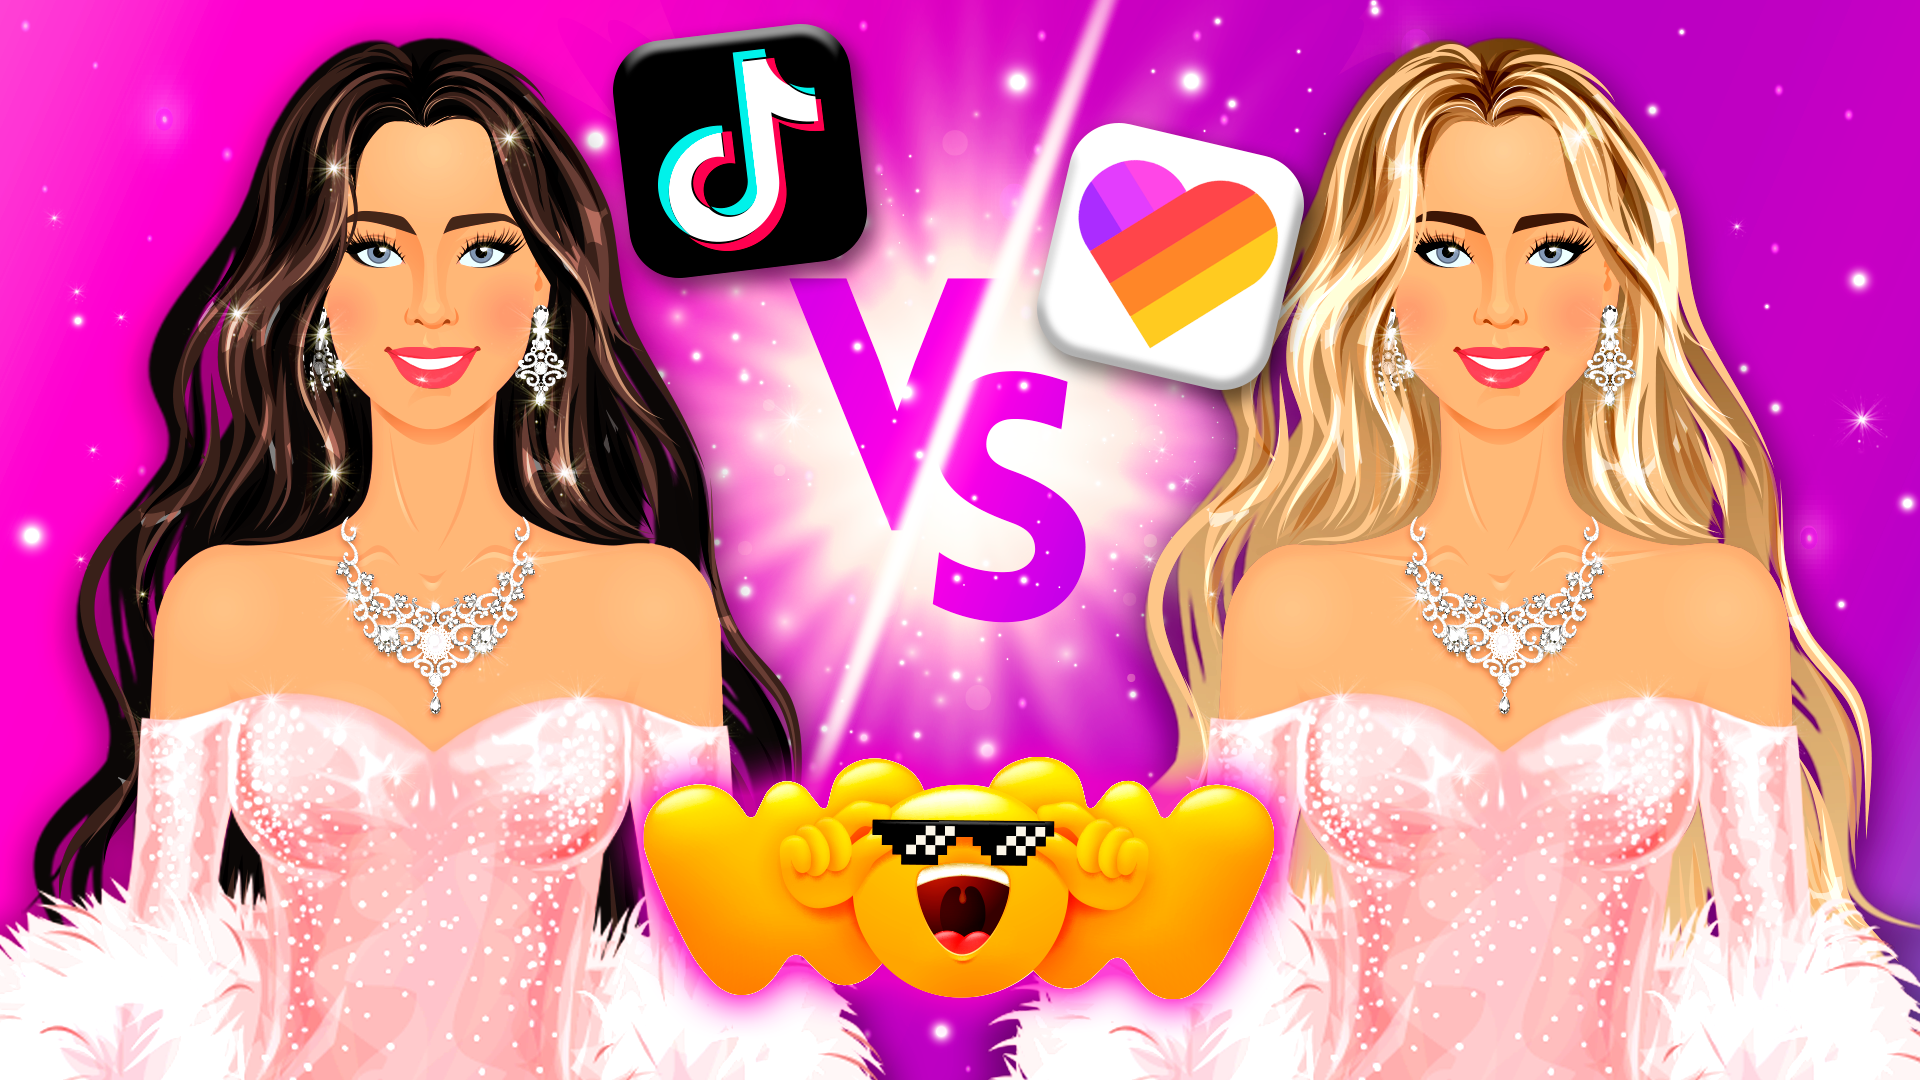 Games For Girls - Online Free Games